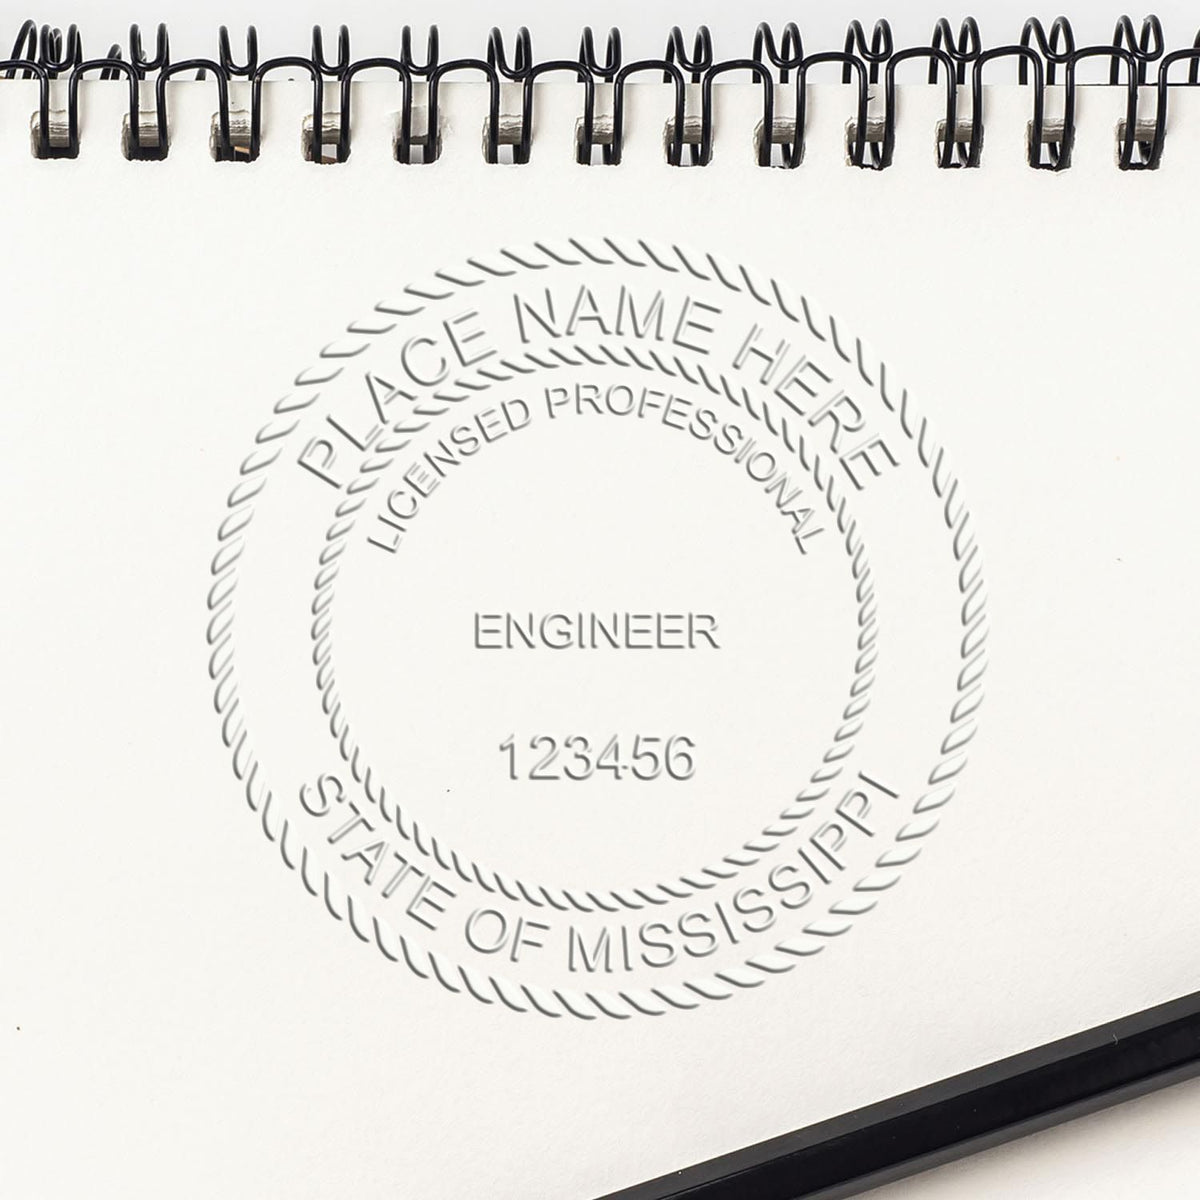 The Heavy Duty Cast Iron Mississippi Engineer Seal Embosser stamp impression comes to life with a crisp, detailed photo on paper - showcasing true professional quality.